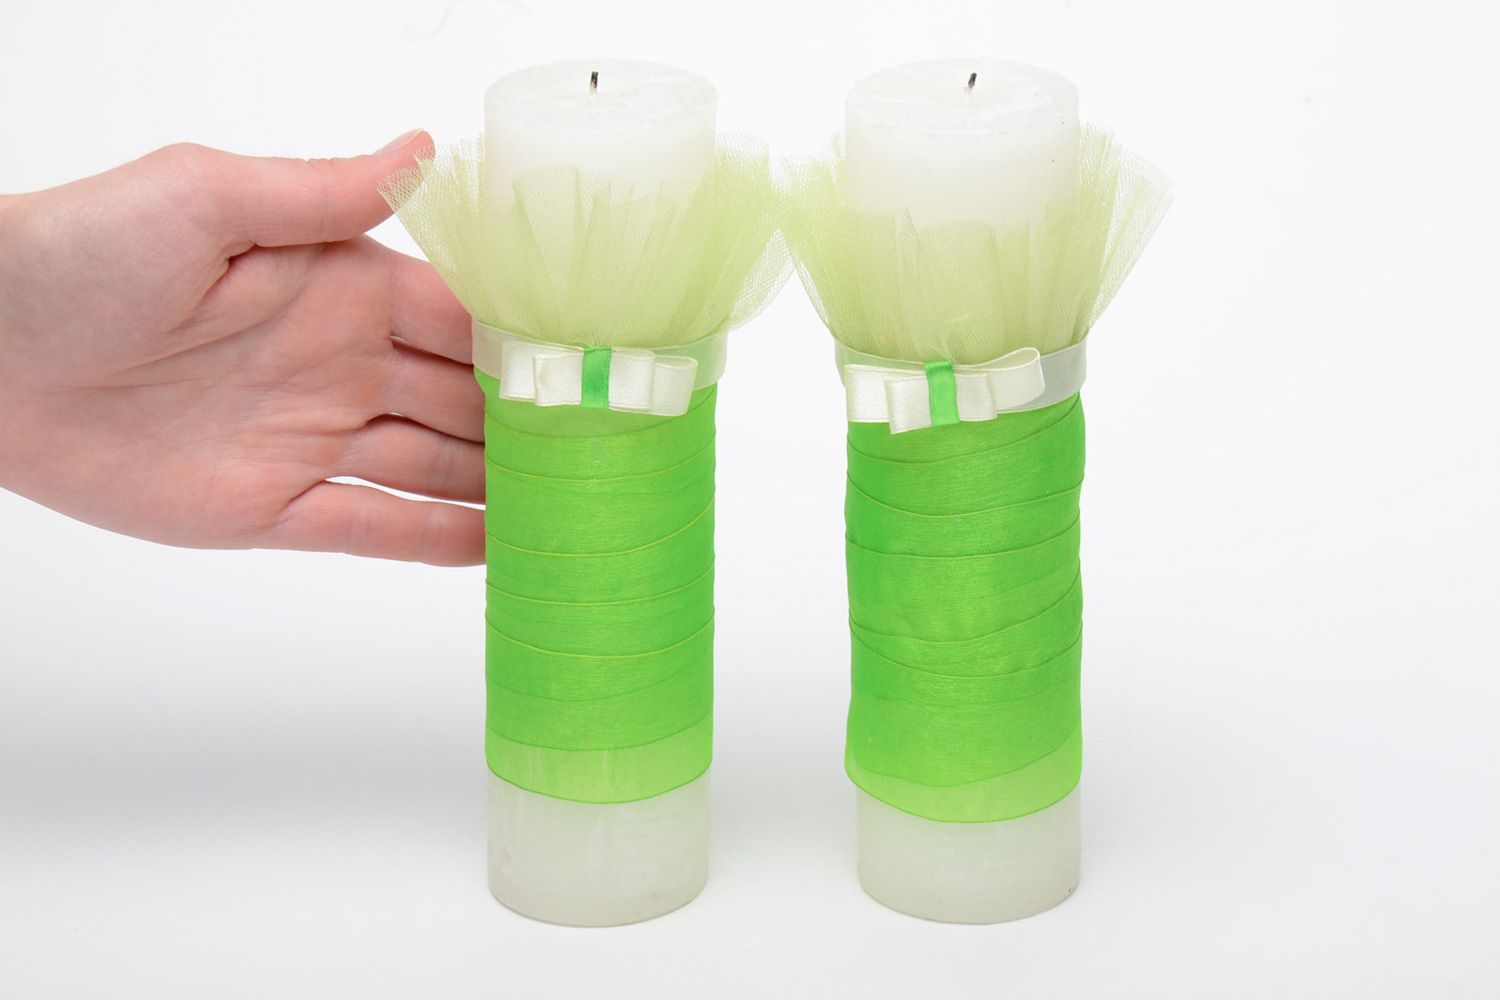 Handmade decorative wax wedding candles in white and green colors 2 items photo 5